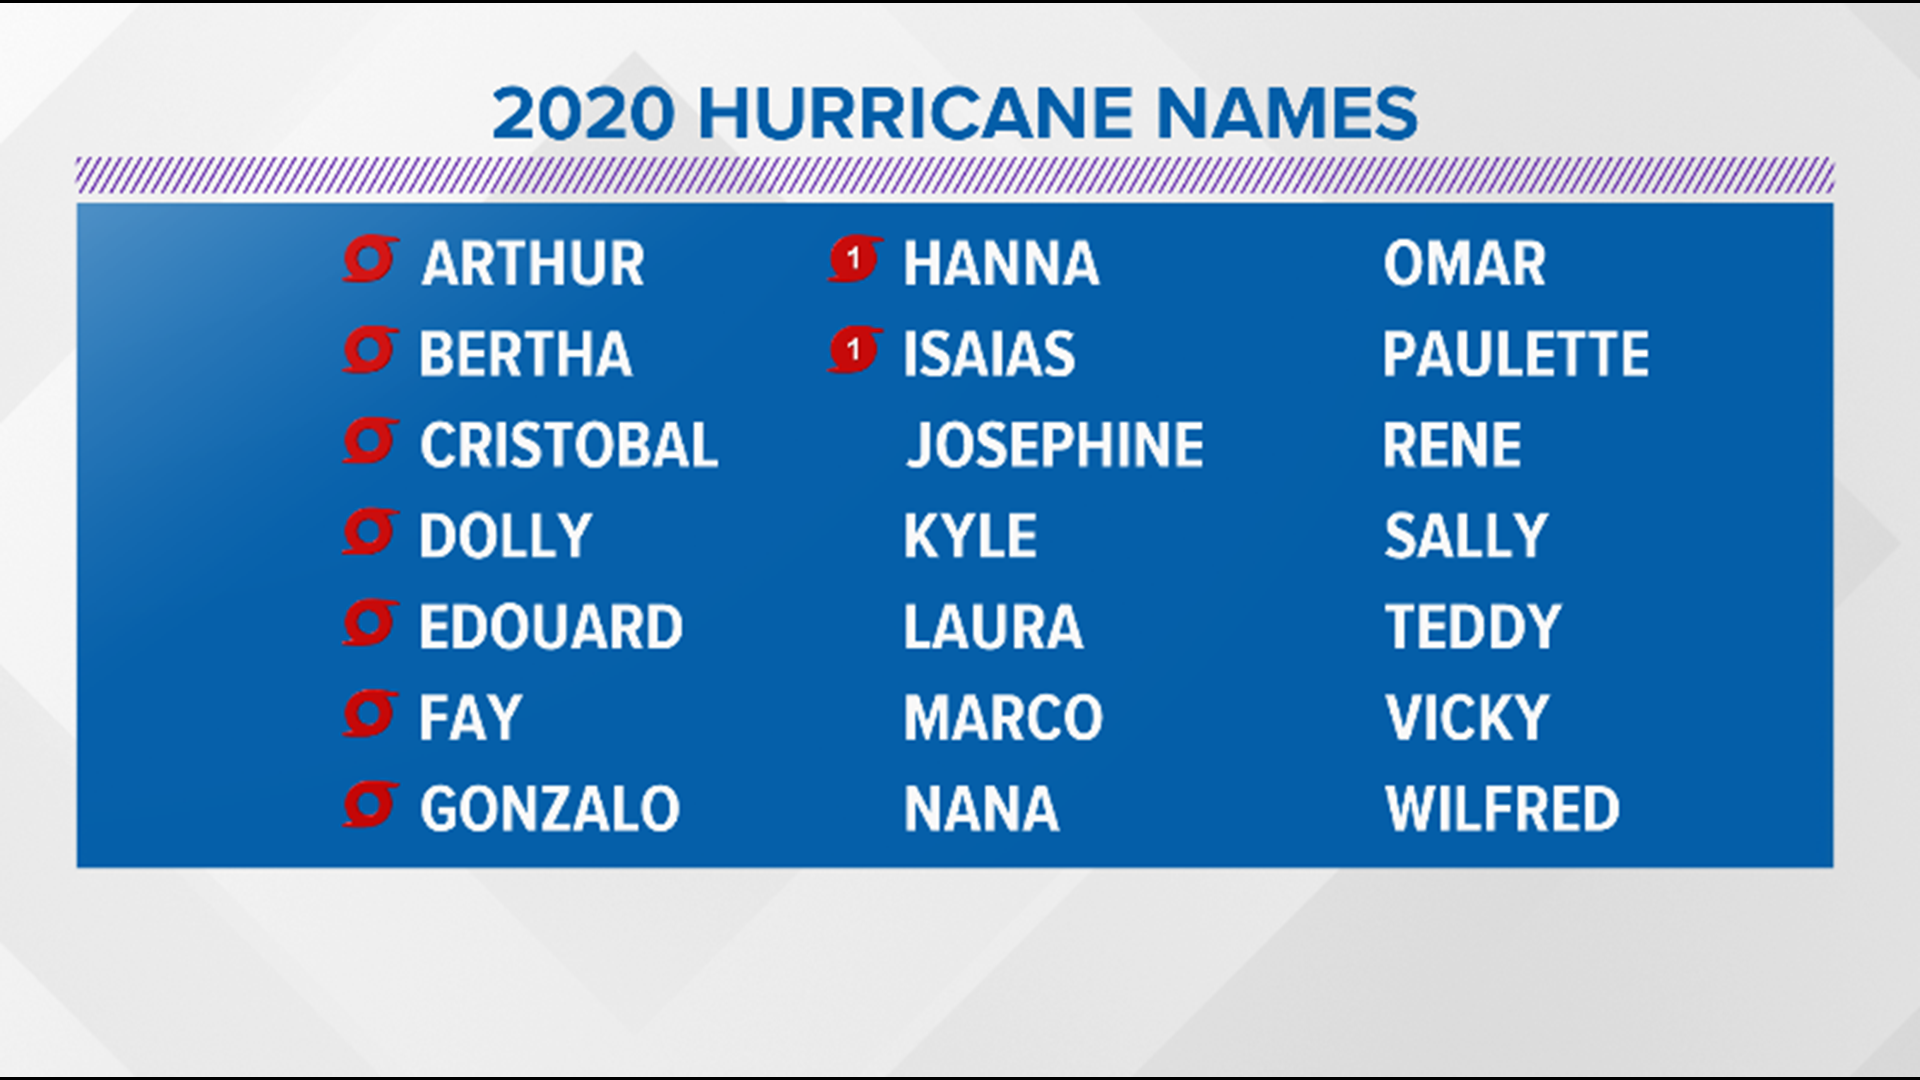 How hurricanes get their names